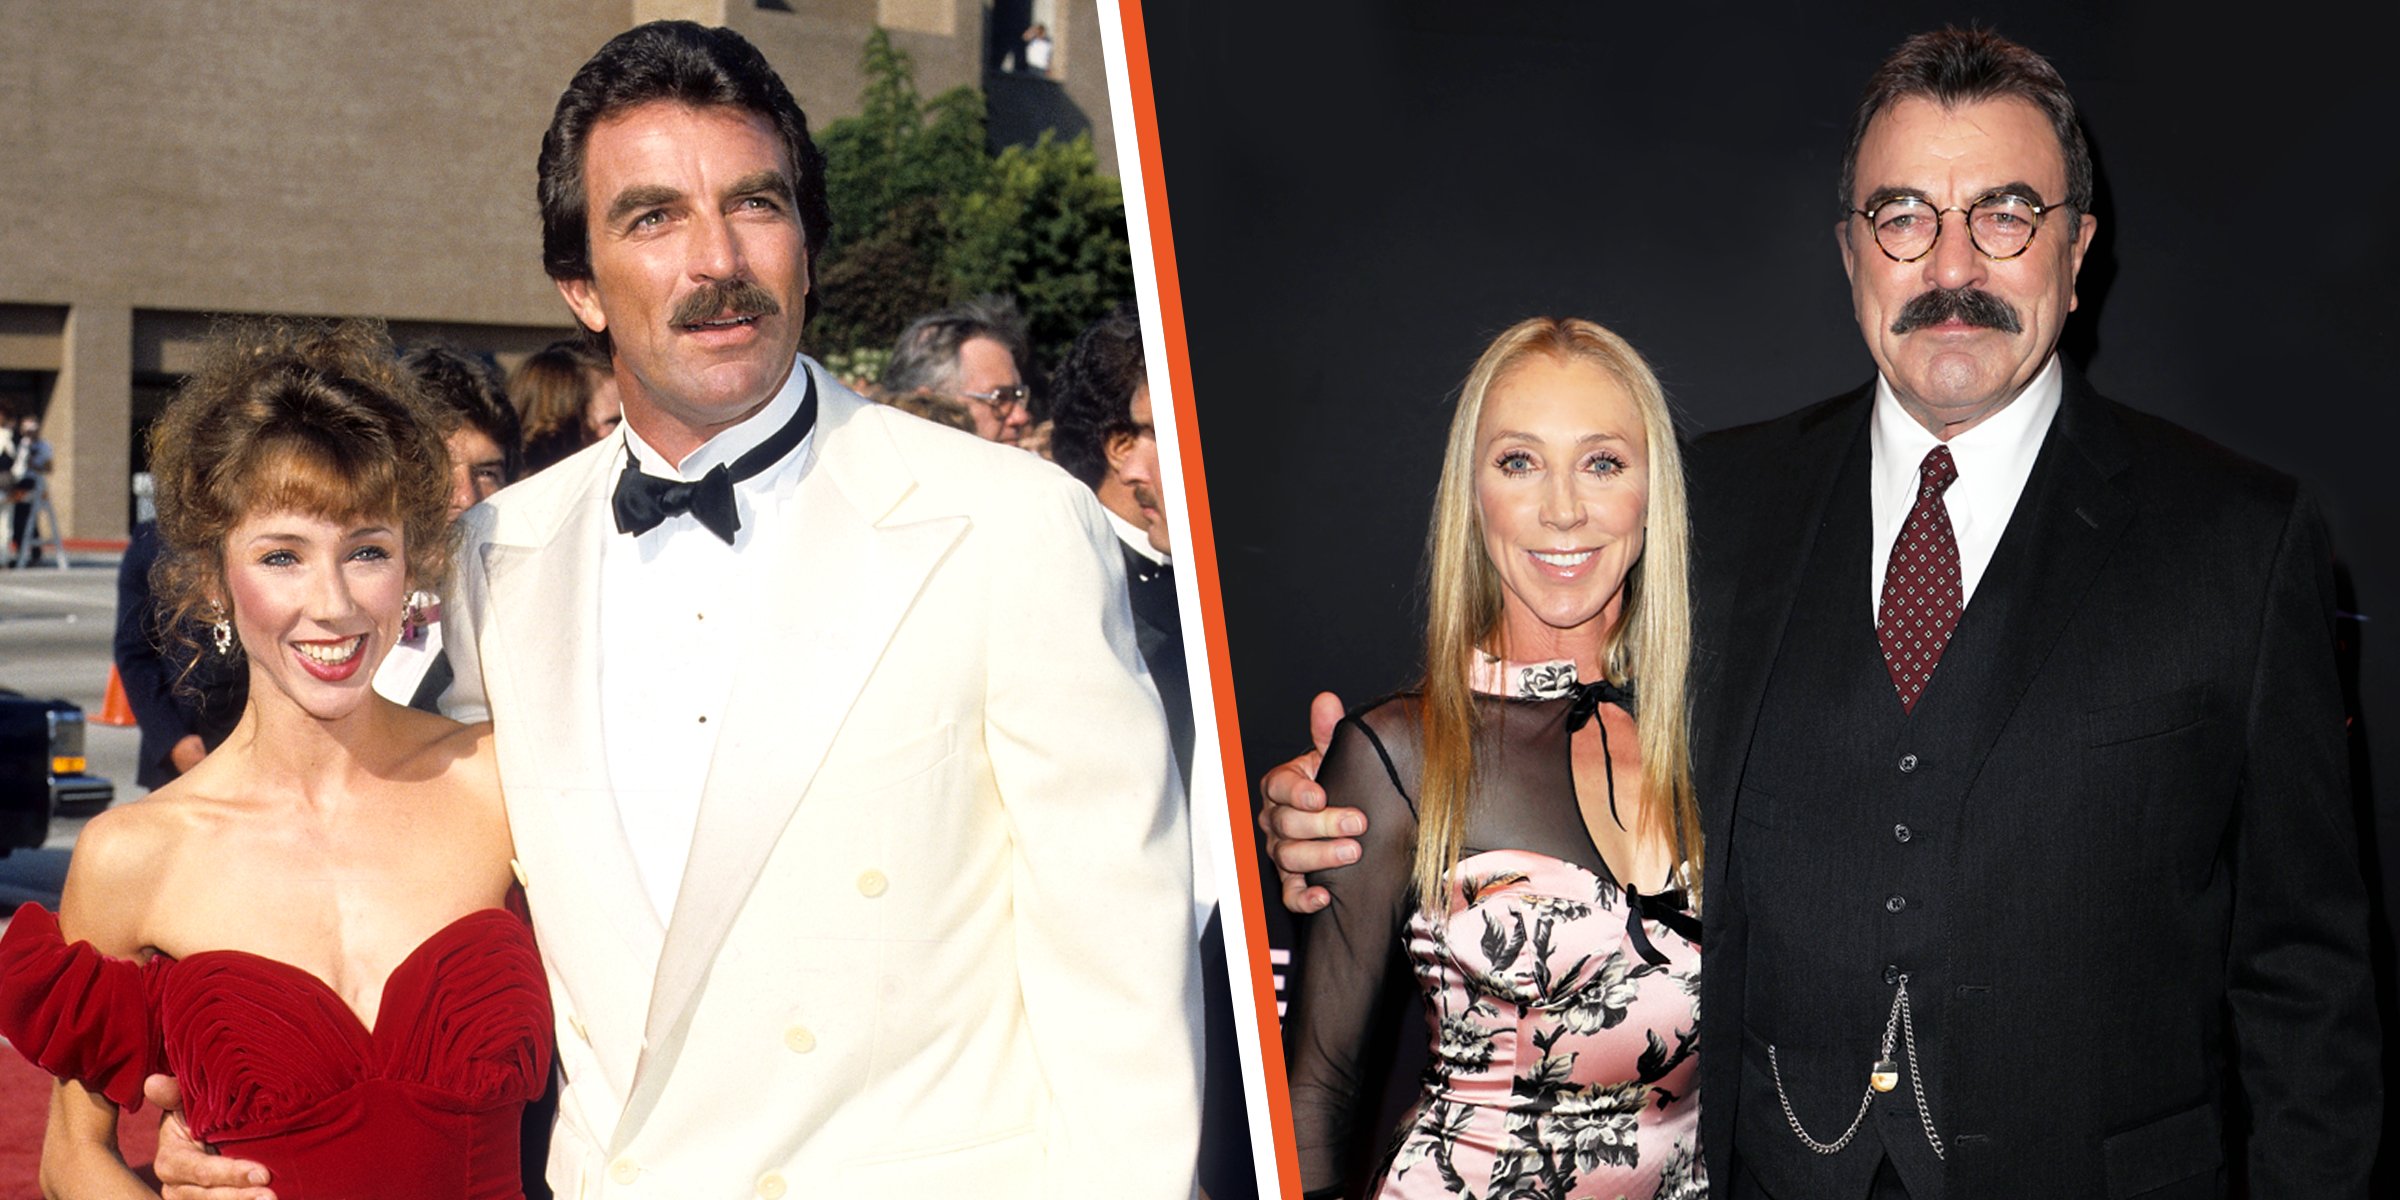 (L)  Tom Selleck and Jillie Mack during the 38th Annual Primetime Emmy Awards on September 21, 1986 at the Pasadena Civic Auditorium in Pasadena, California. (R)  Jillie Mack and Tom Selleck during the Brandon Tartikoff Legacy Awards at NATPE 2018 at the Fontainebleau Hotel on January 17, 2018 in Miami Beach, Florida. | Source: Getty Images